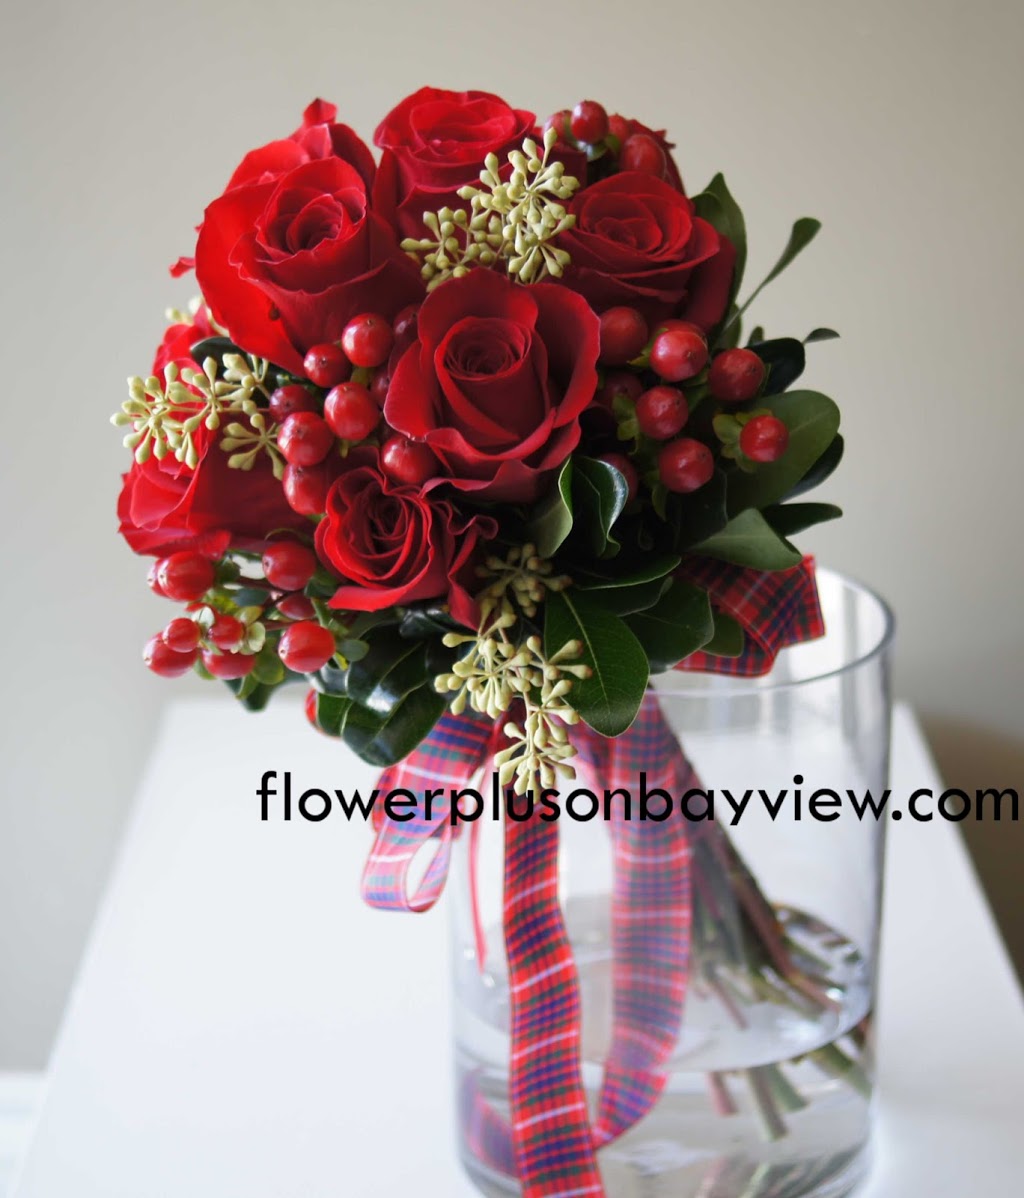 Flower Plus - Designs by Christine Liao | florist | 1709 Bayview Ave, East York, ON M4G 3C1, Canada | 4164851167 OR +1 416-485-1167